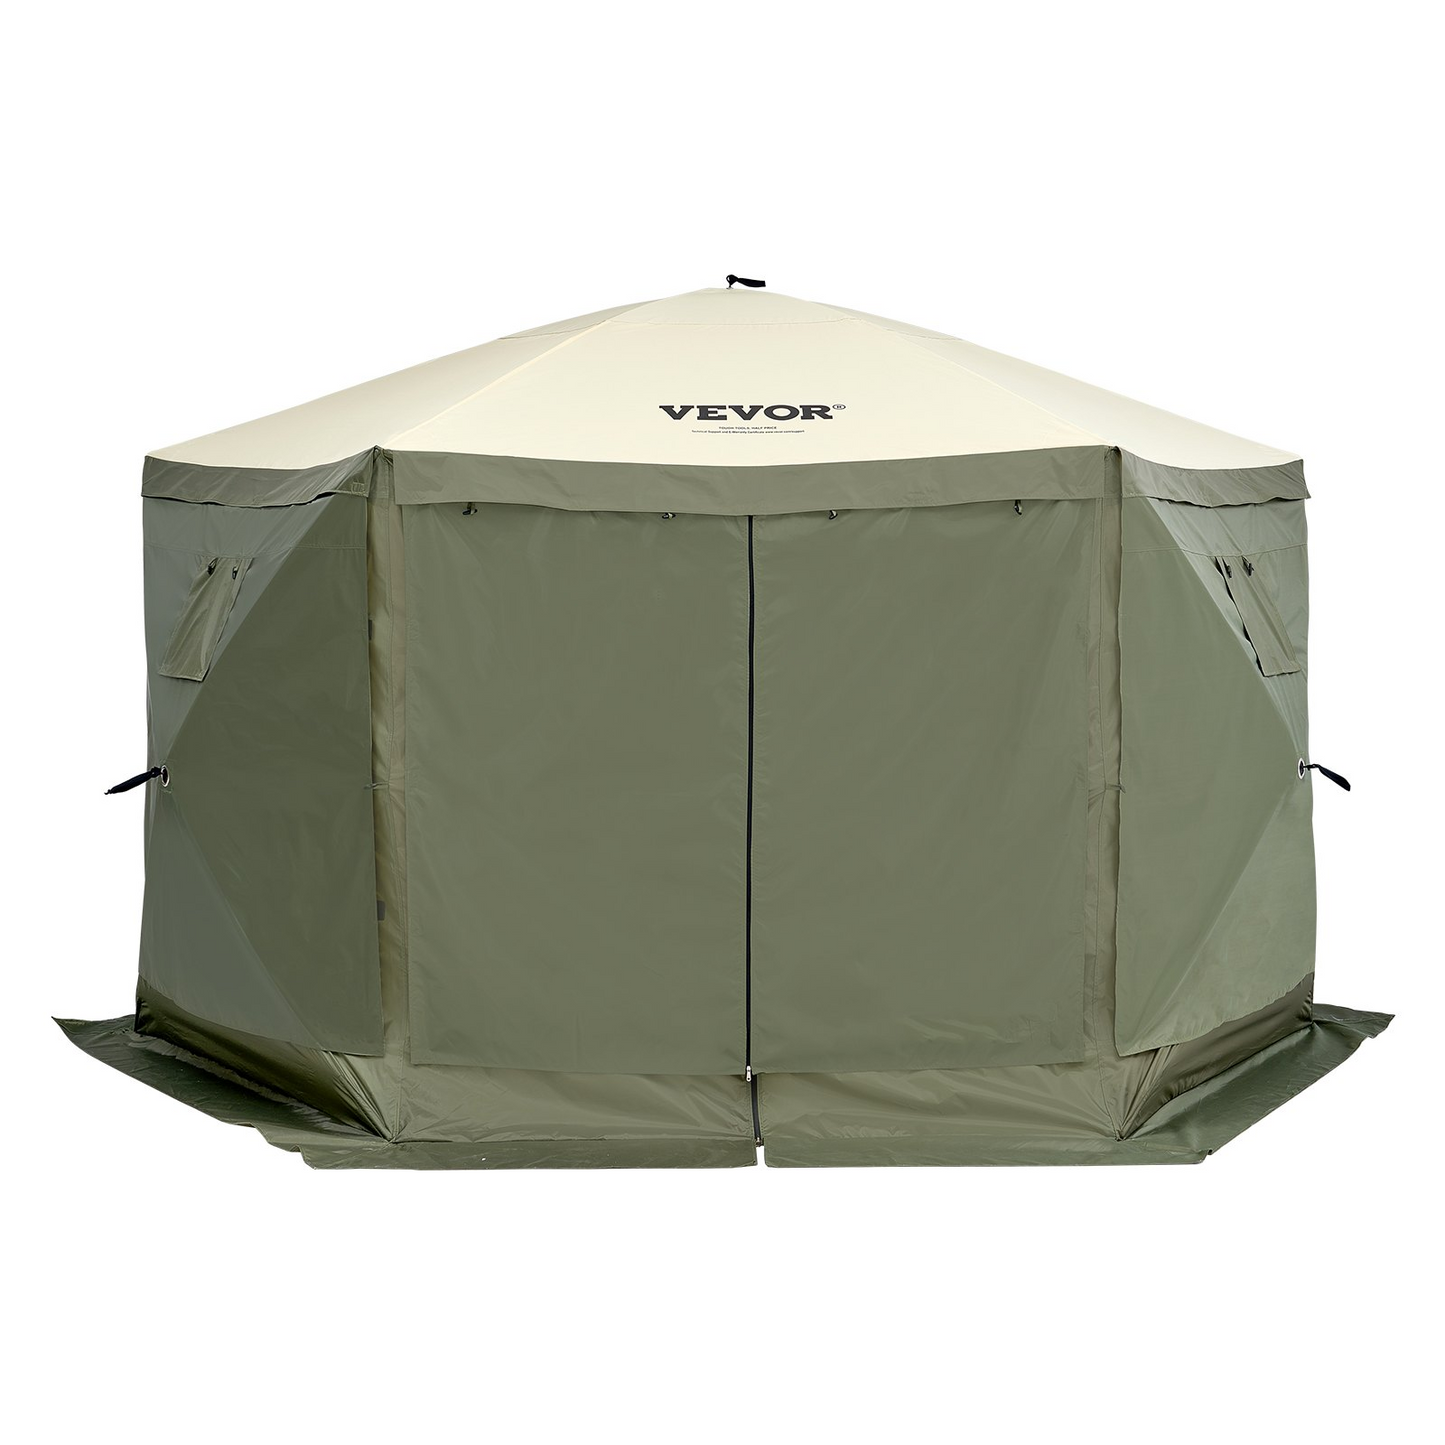 VEVOR Pop Up Gazebo Tent, Pop-Up Screen Tent 6 Sided Canopy Sun Shelter with 6 Removable Privacy Wind Cloths & Mesh Windows, 12x12FT Quick Set Screen Tent with Mosquito Netting, Army Green, Goodies N Stuff